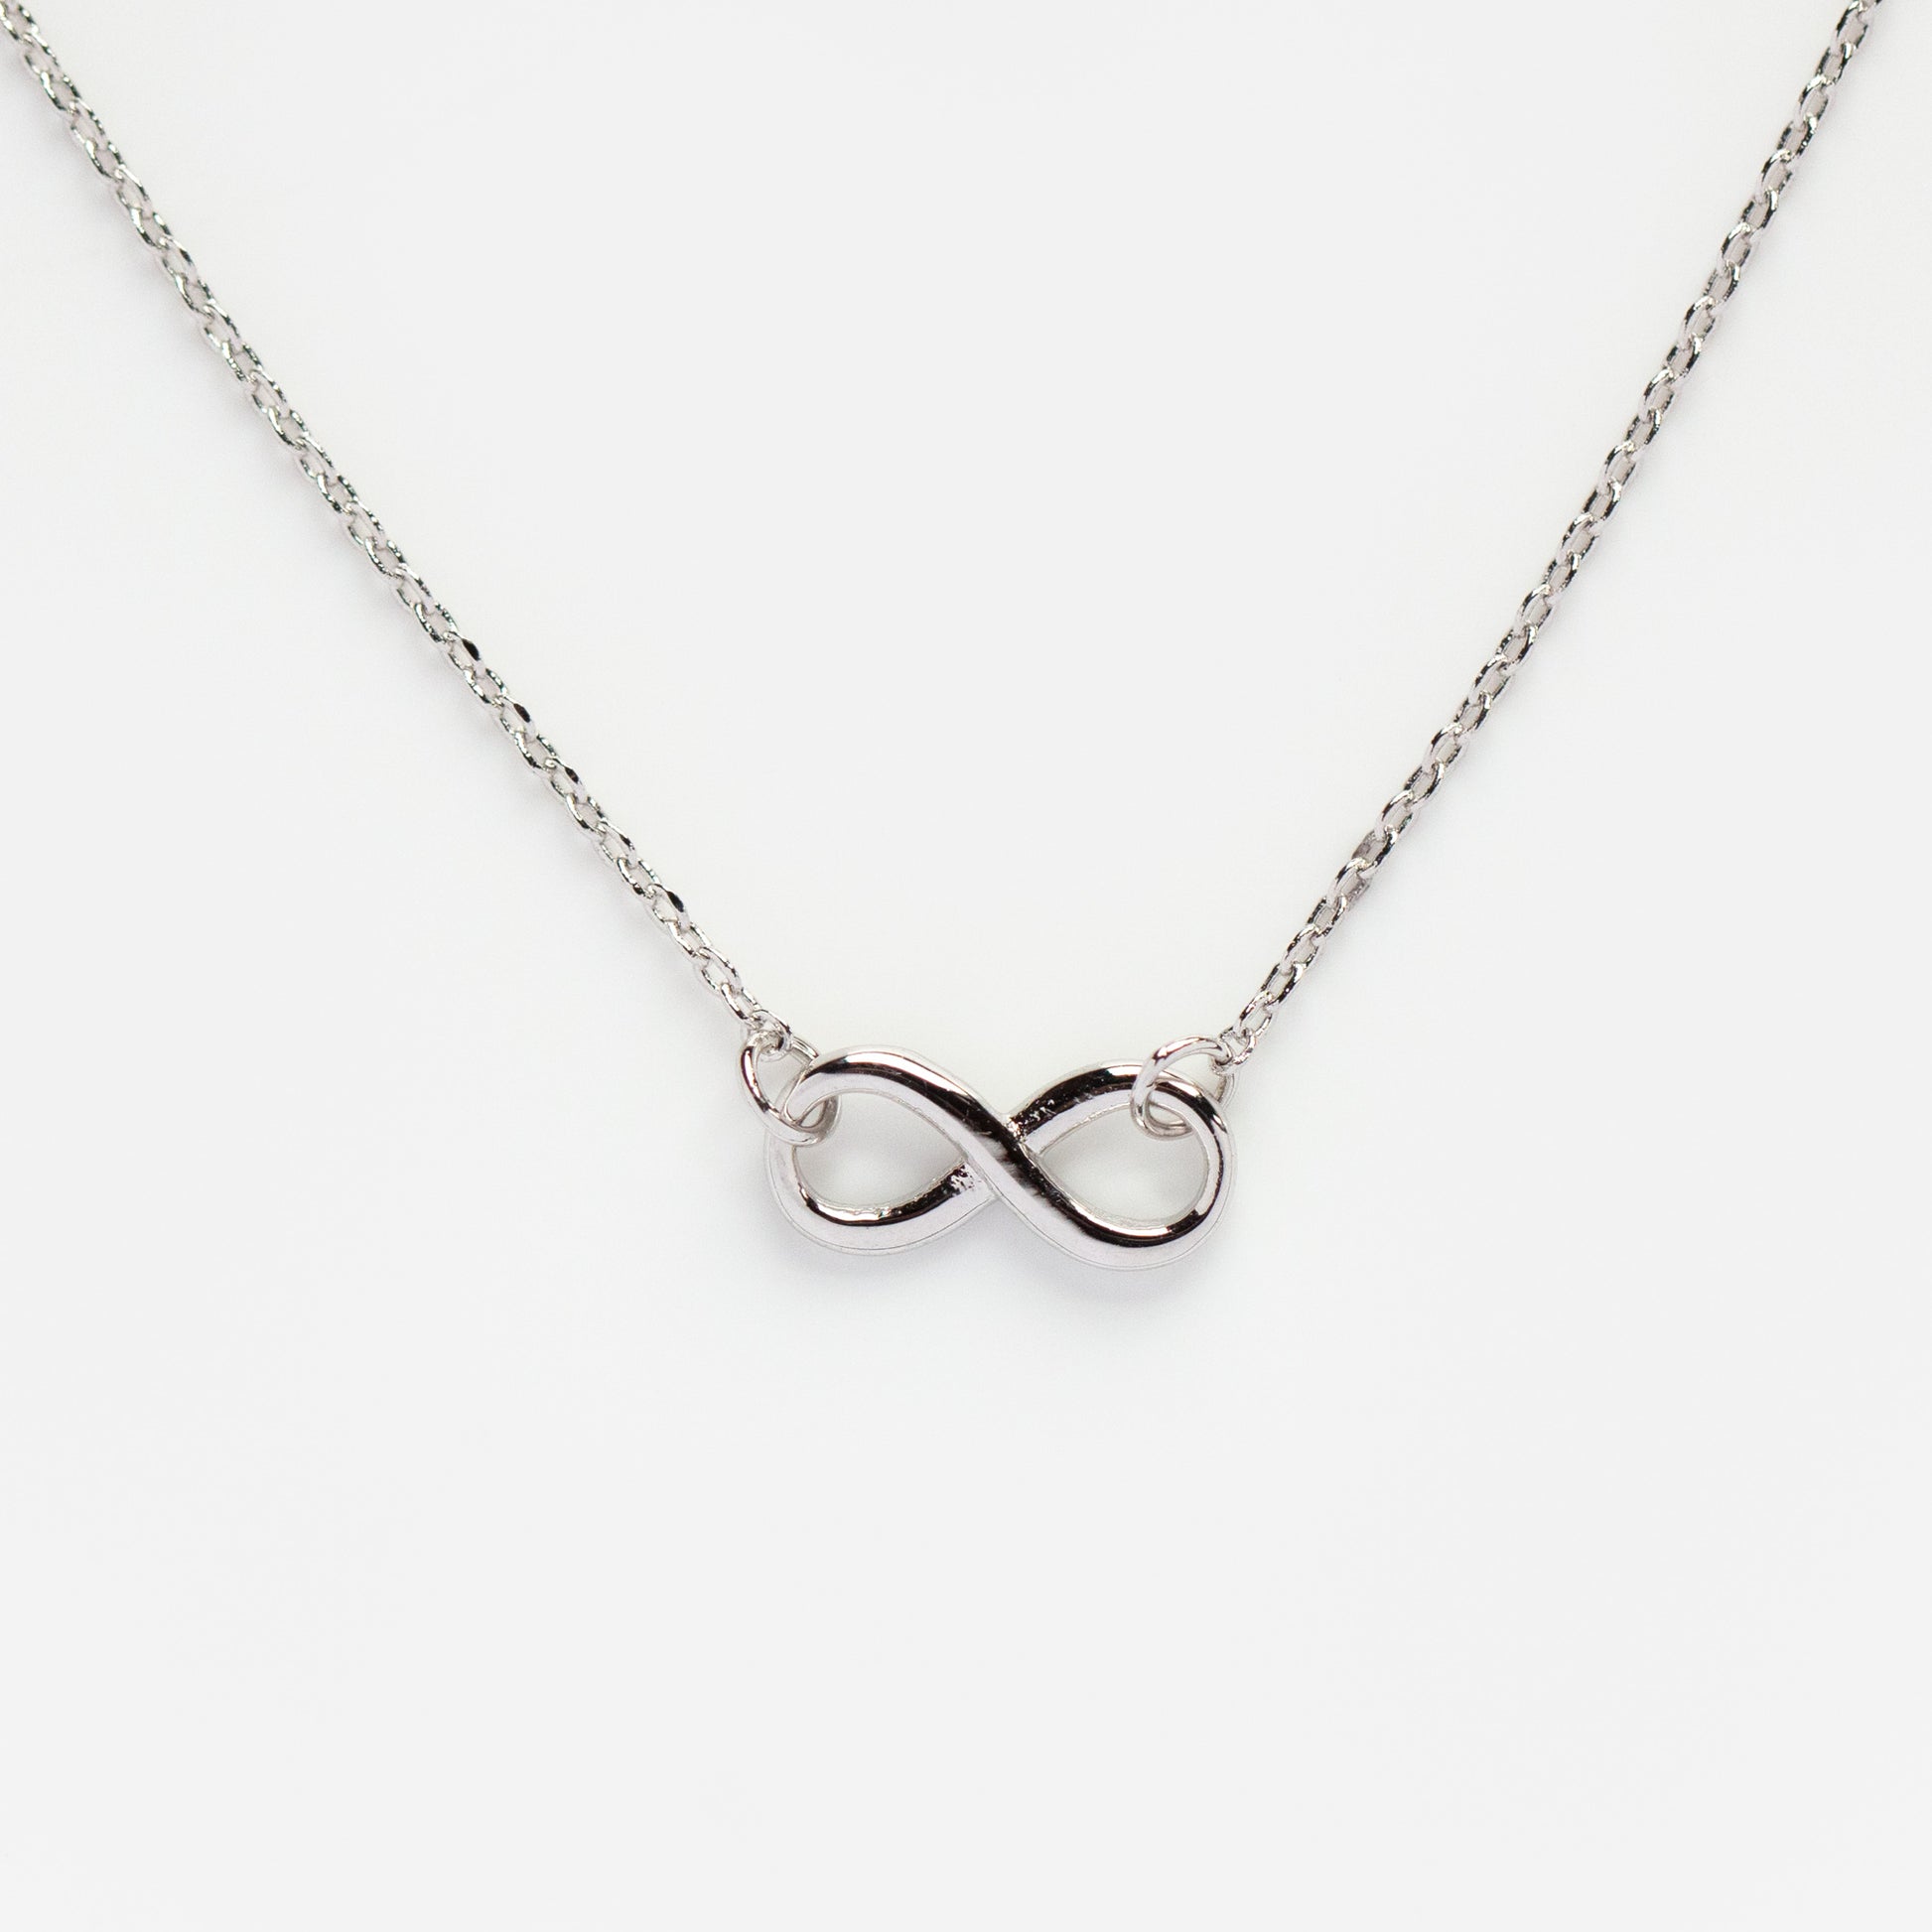 The Summer I Turned Pretty Silver Infinity Necklace by Local Eclectic - Local Eclectic